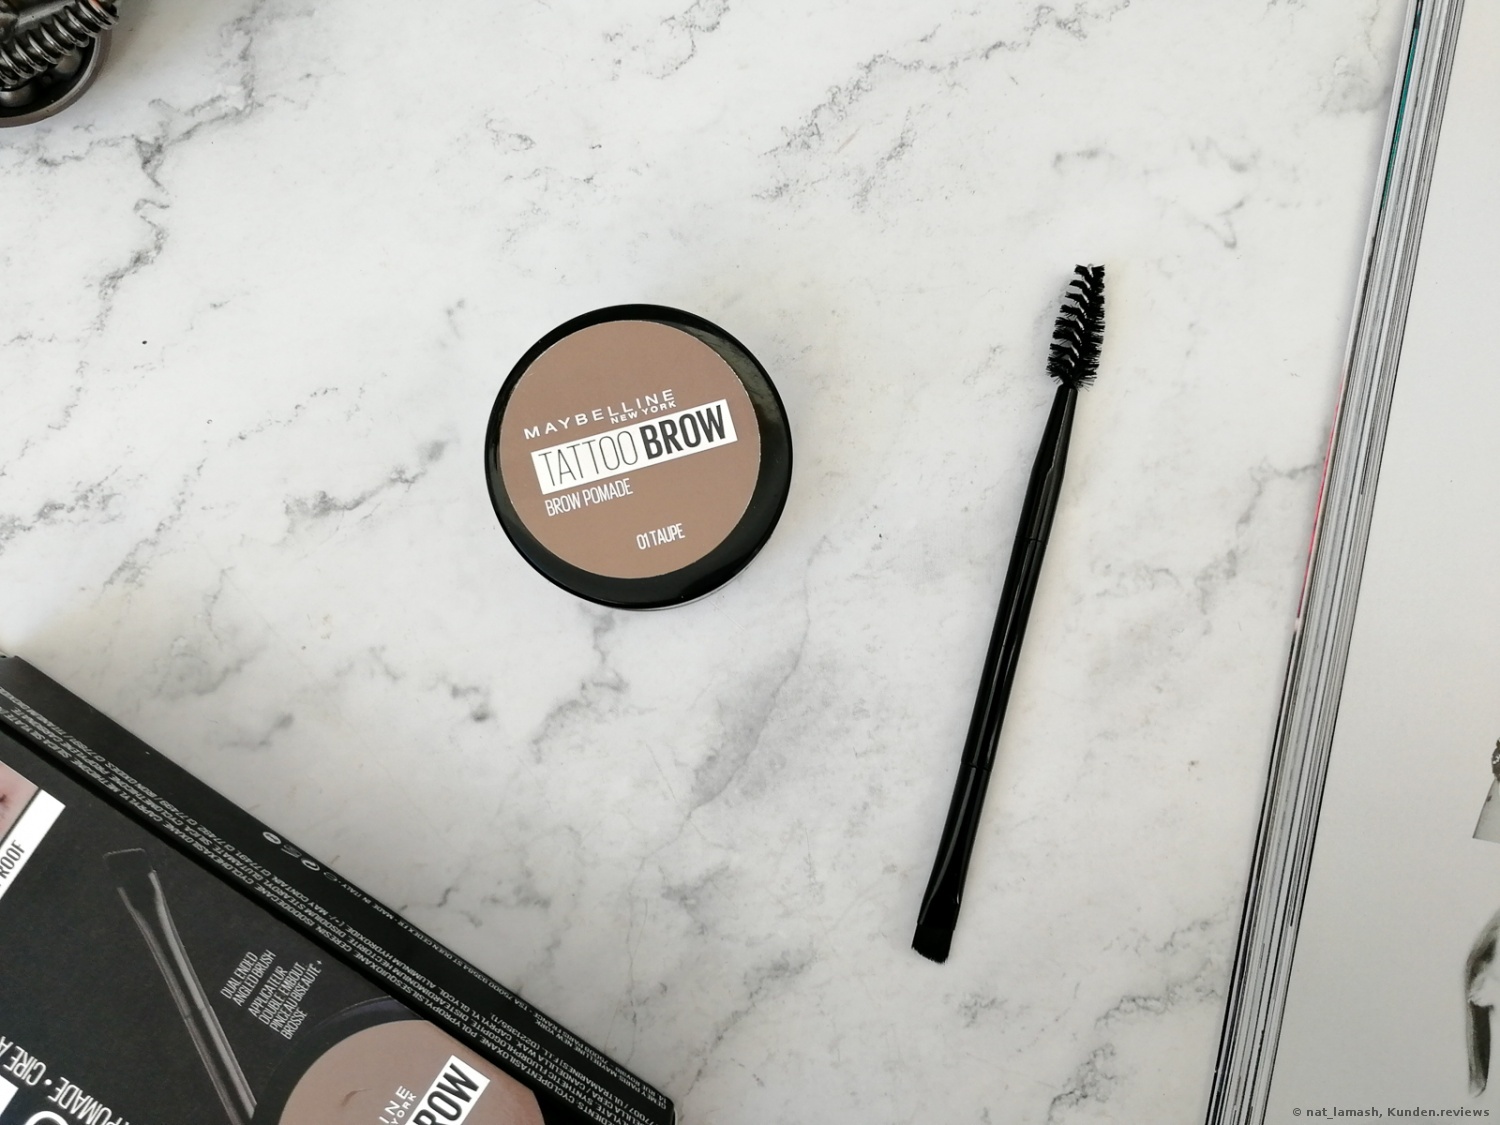 MAYBELLINE Tattoo Brow Pomade.  01 Taupe